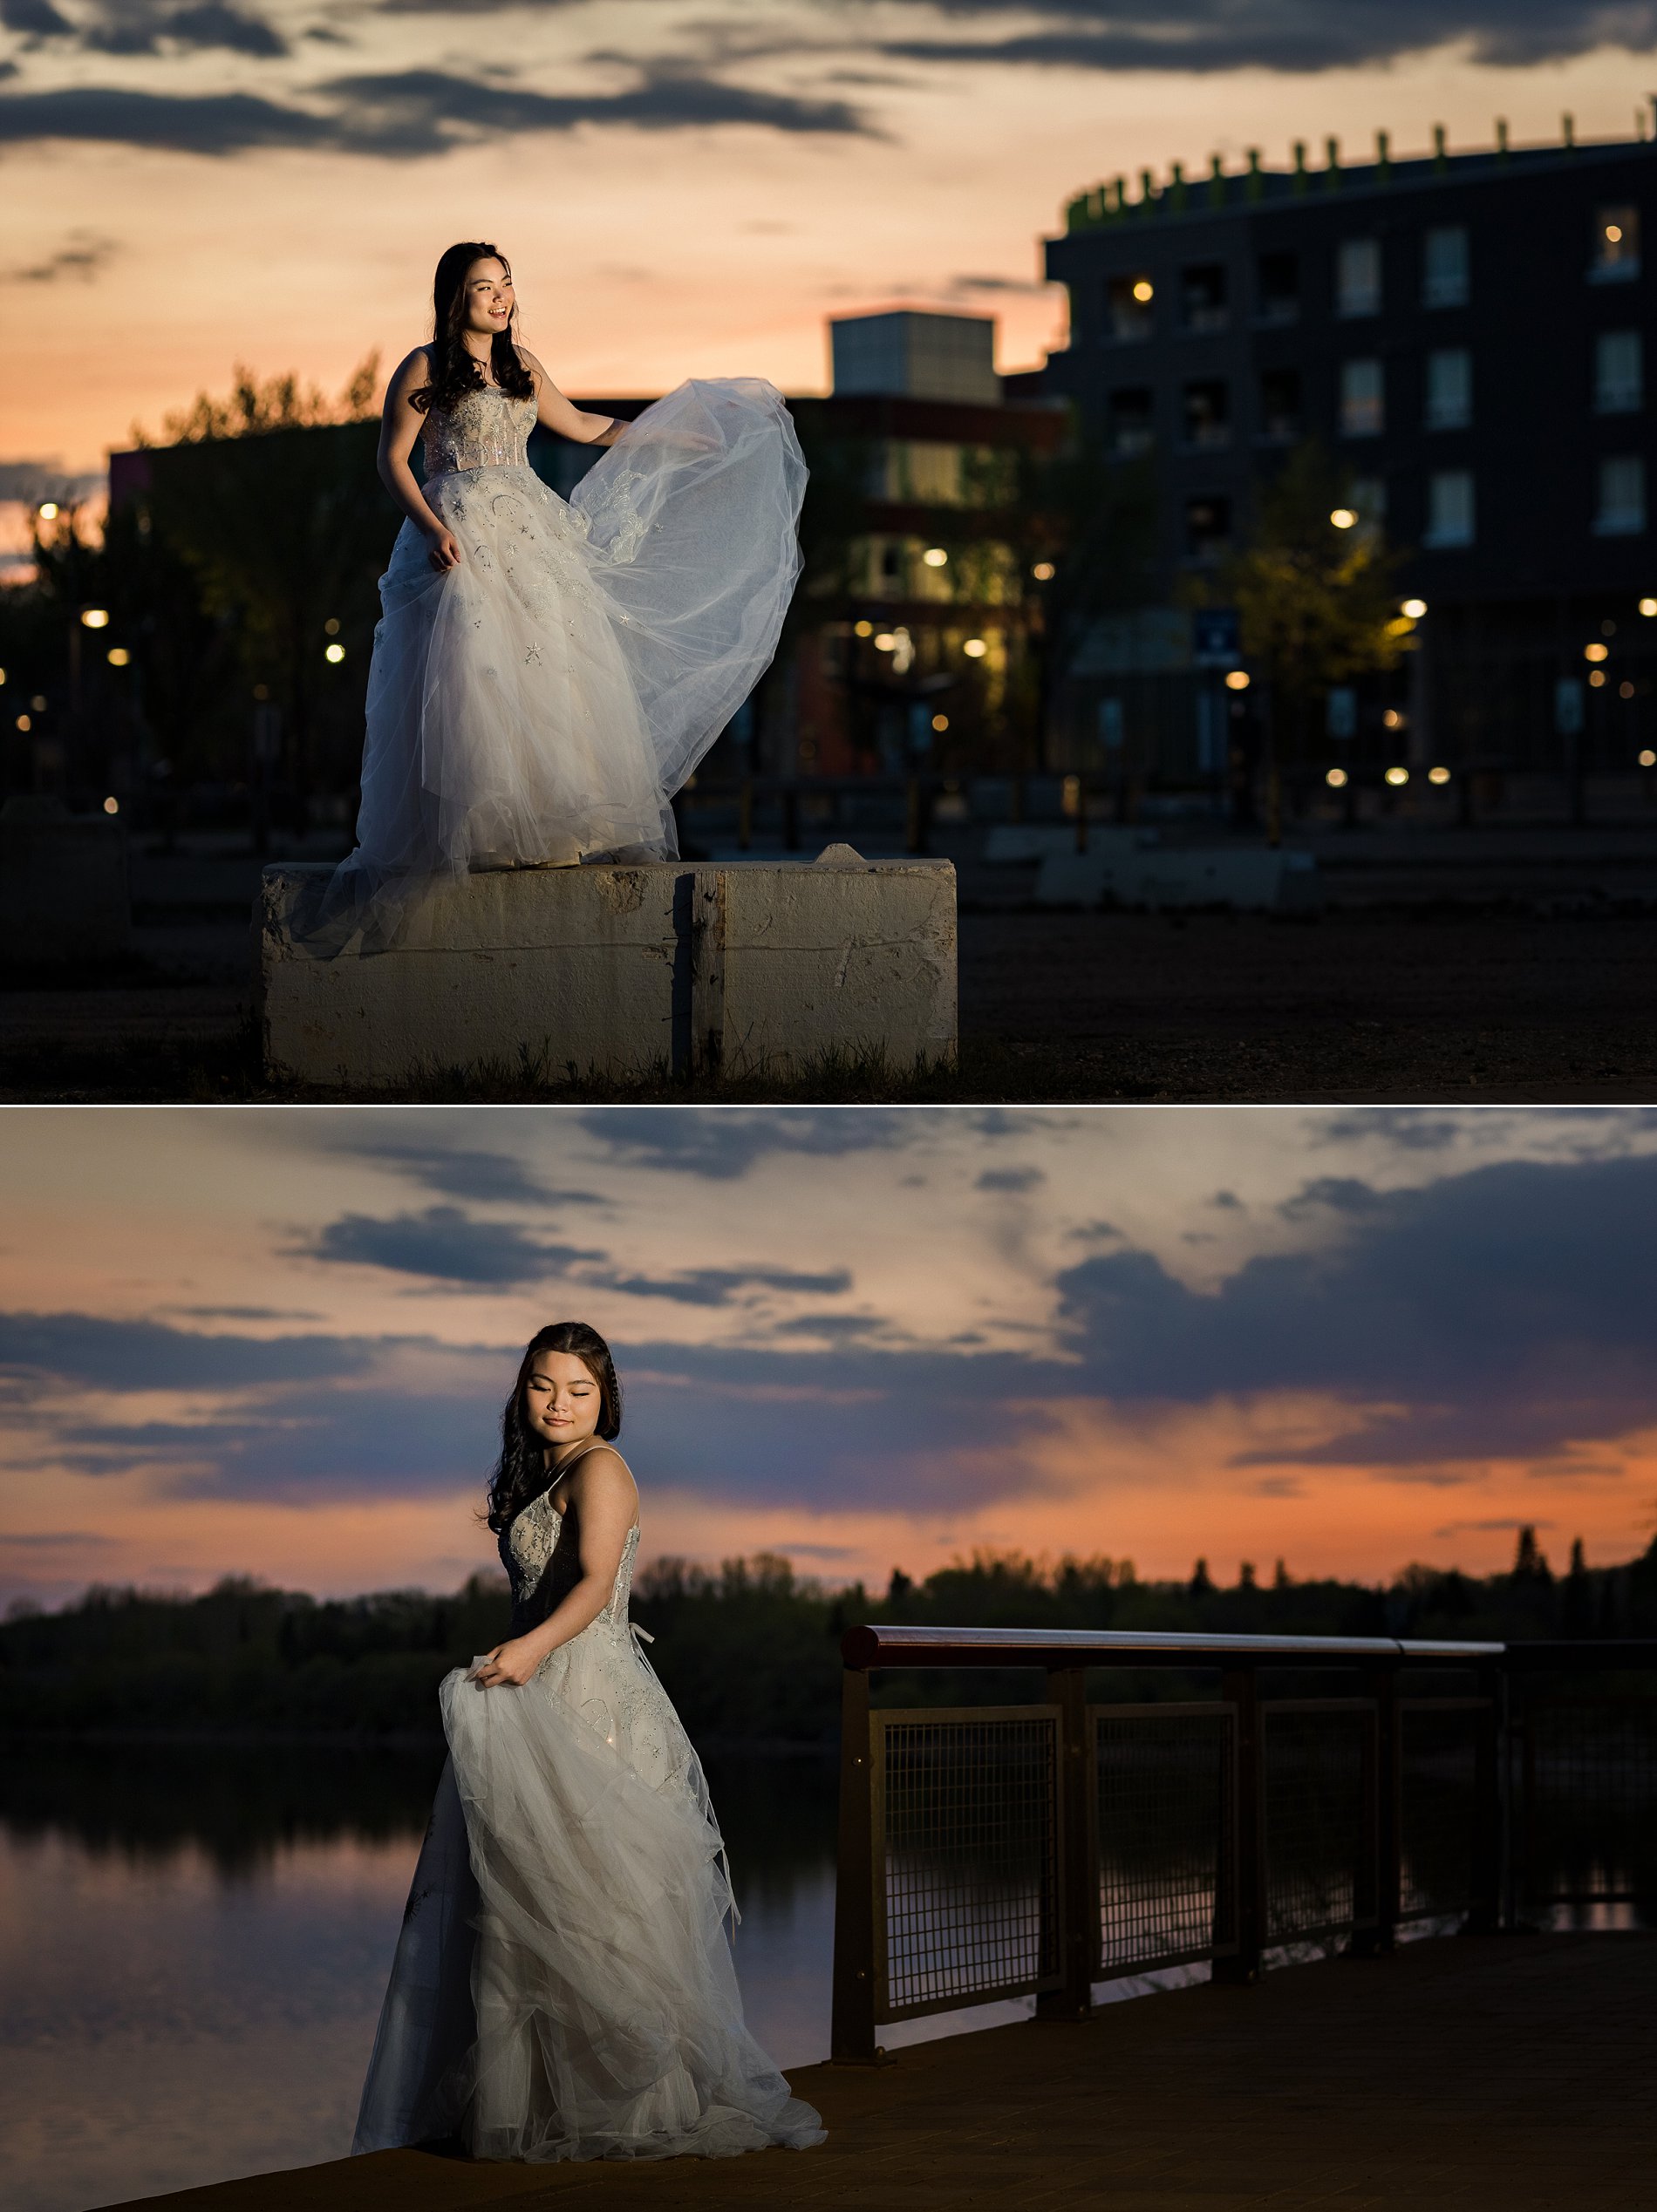 Graduation photos in downtown Saskatoon at River Landing during sunset, with the South Saskatchewan river and city lights in the background.